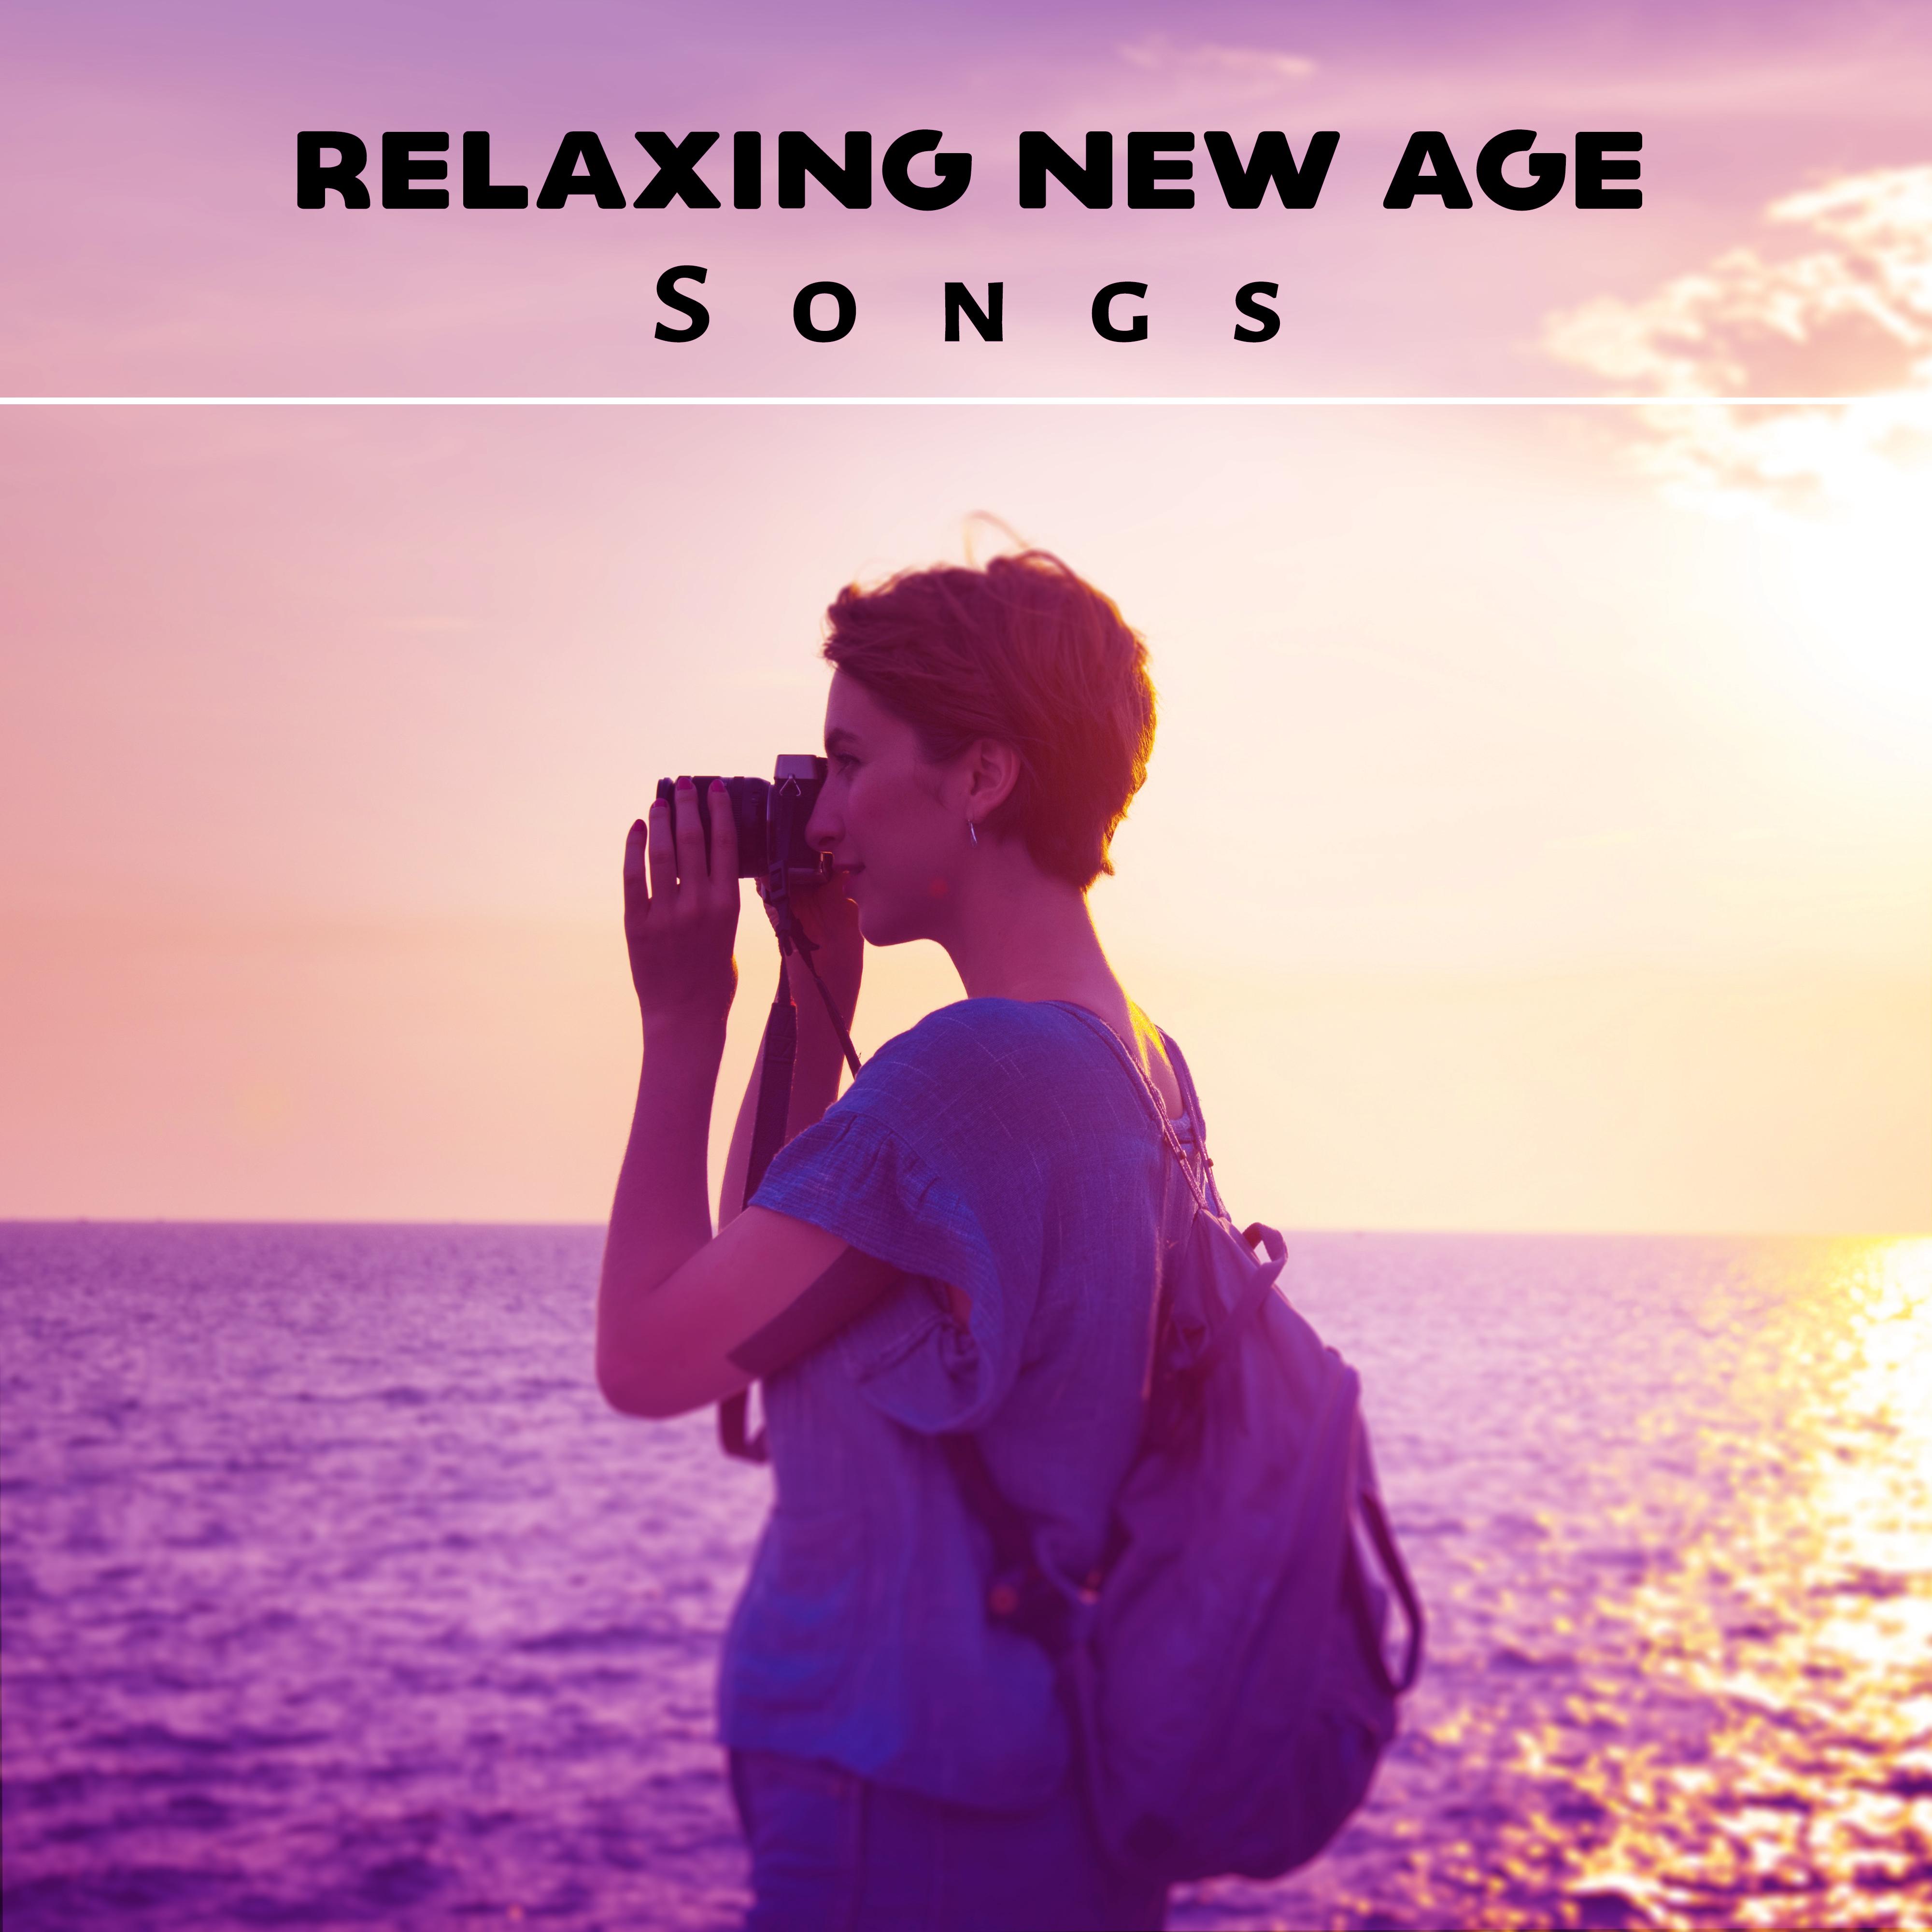 Relaxing New Age Songs – Soft Music to Rest, Peaceful Sounds for Mind Calmness, Stress Free, Healing Melodies